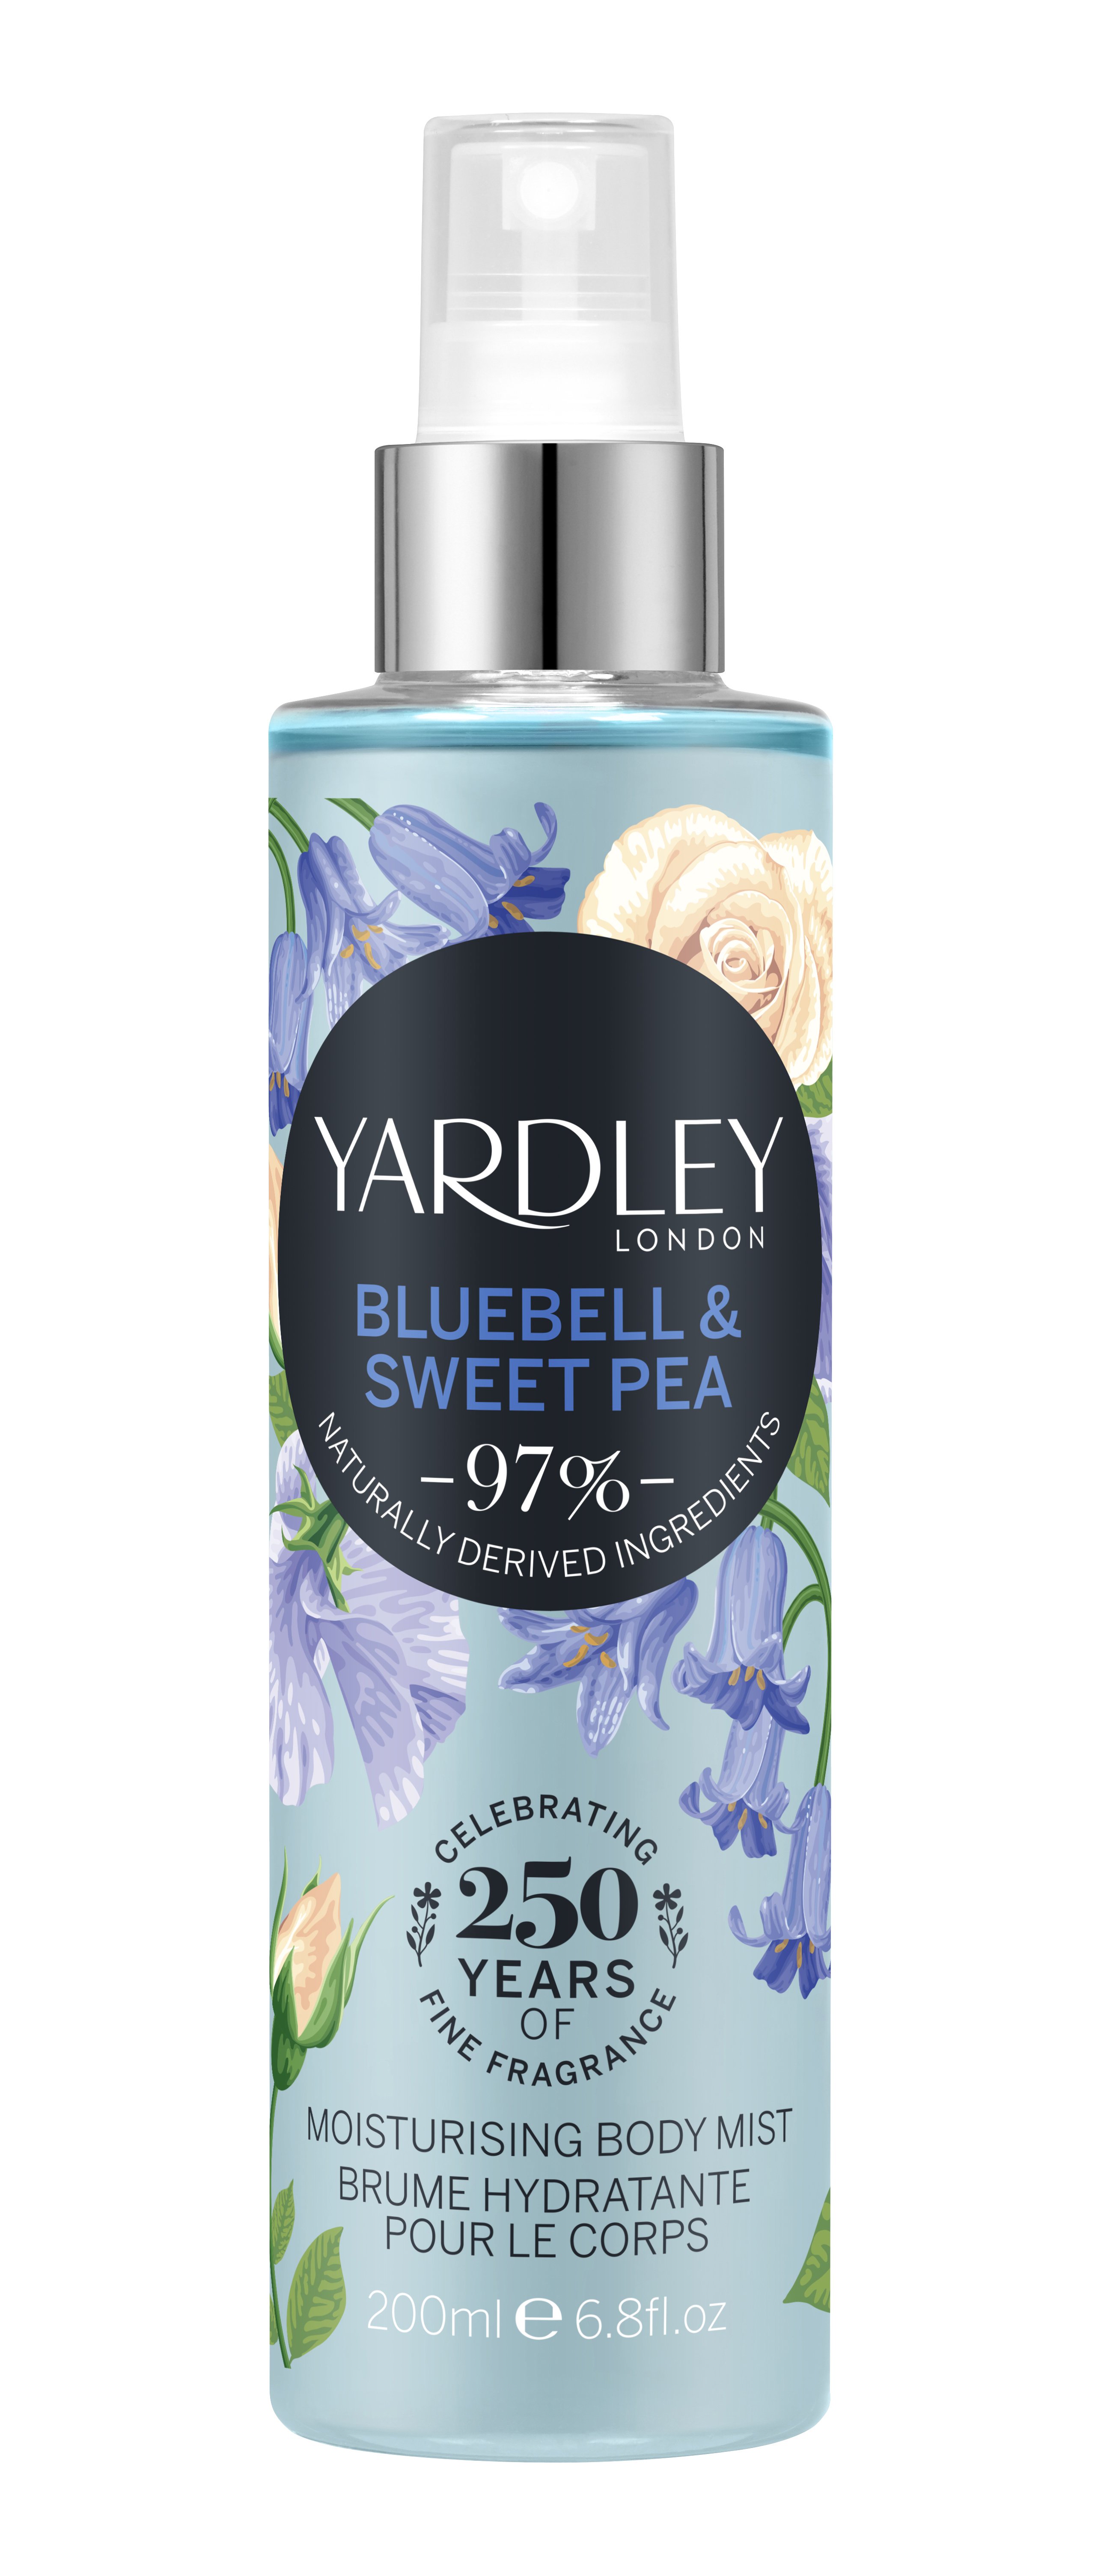 Yardley Bluebell And Sweet Pea 200ml Fragrance Mist